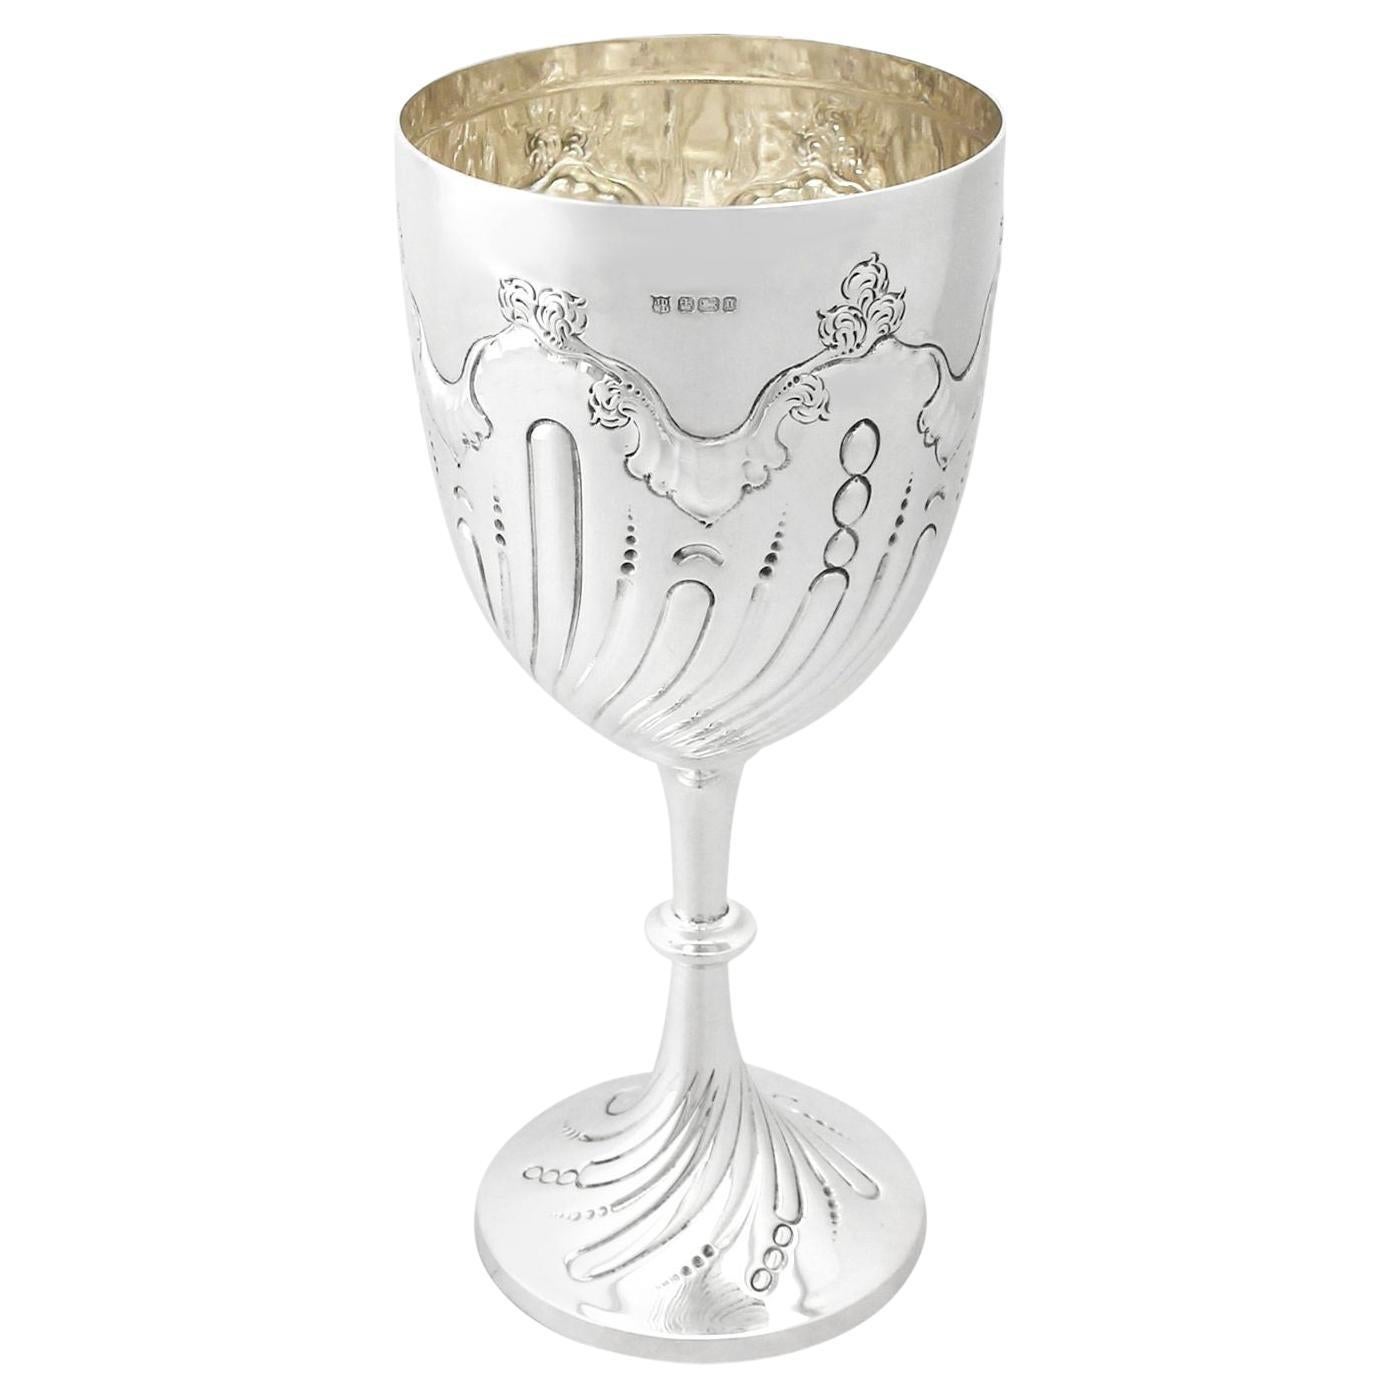 James Deakin & Sons Victorian English Sterling Silver Presentation Cup